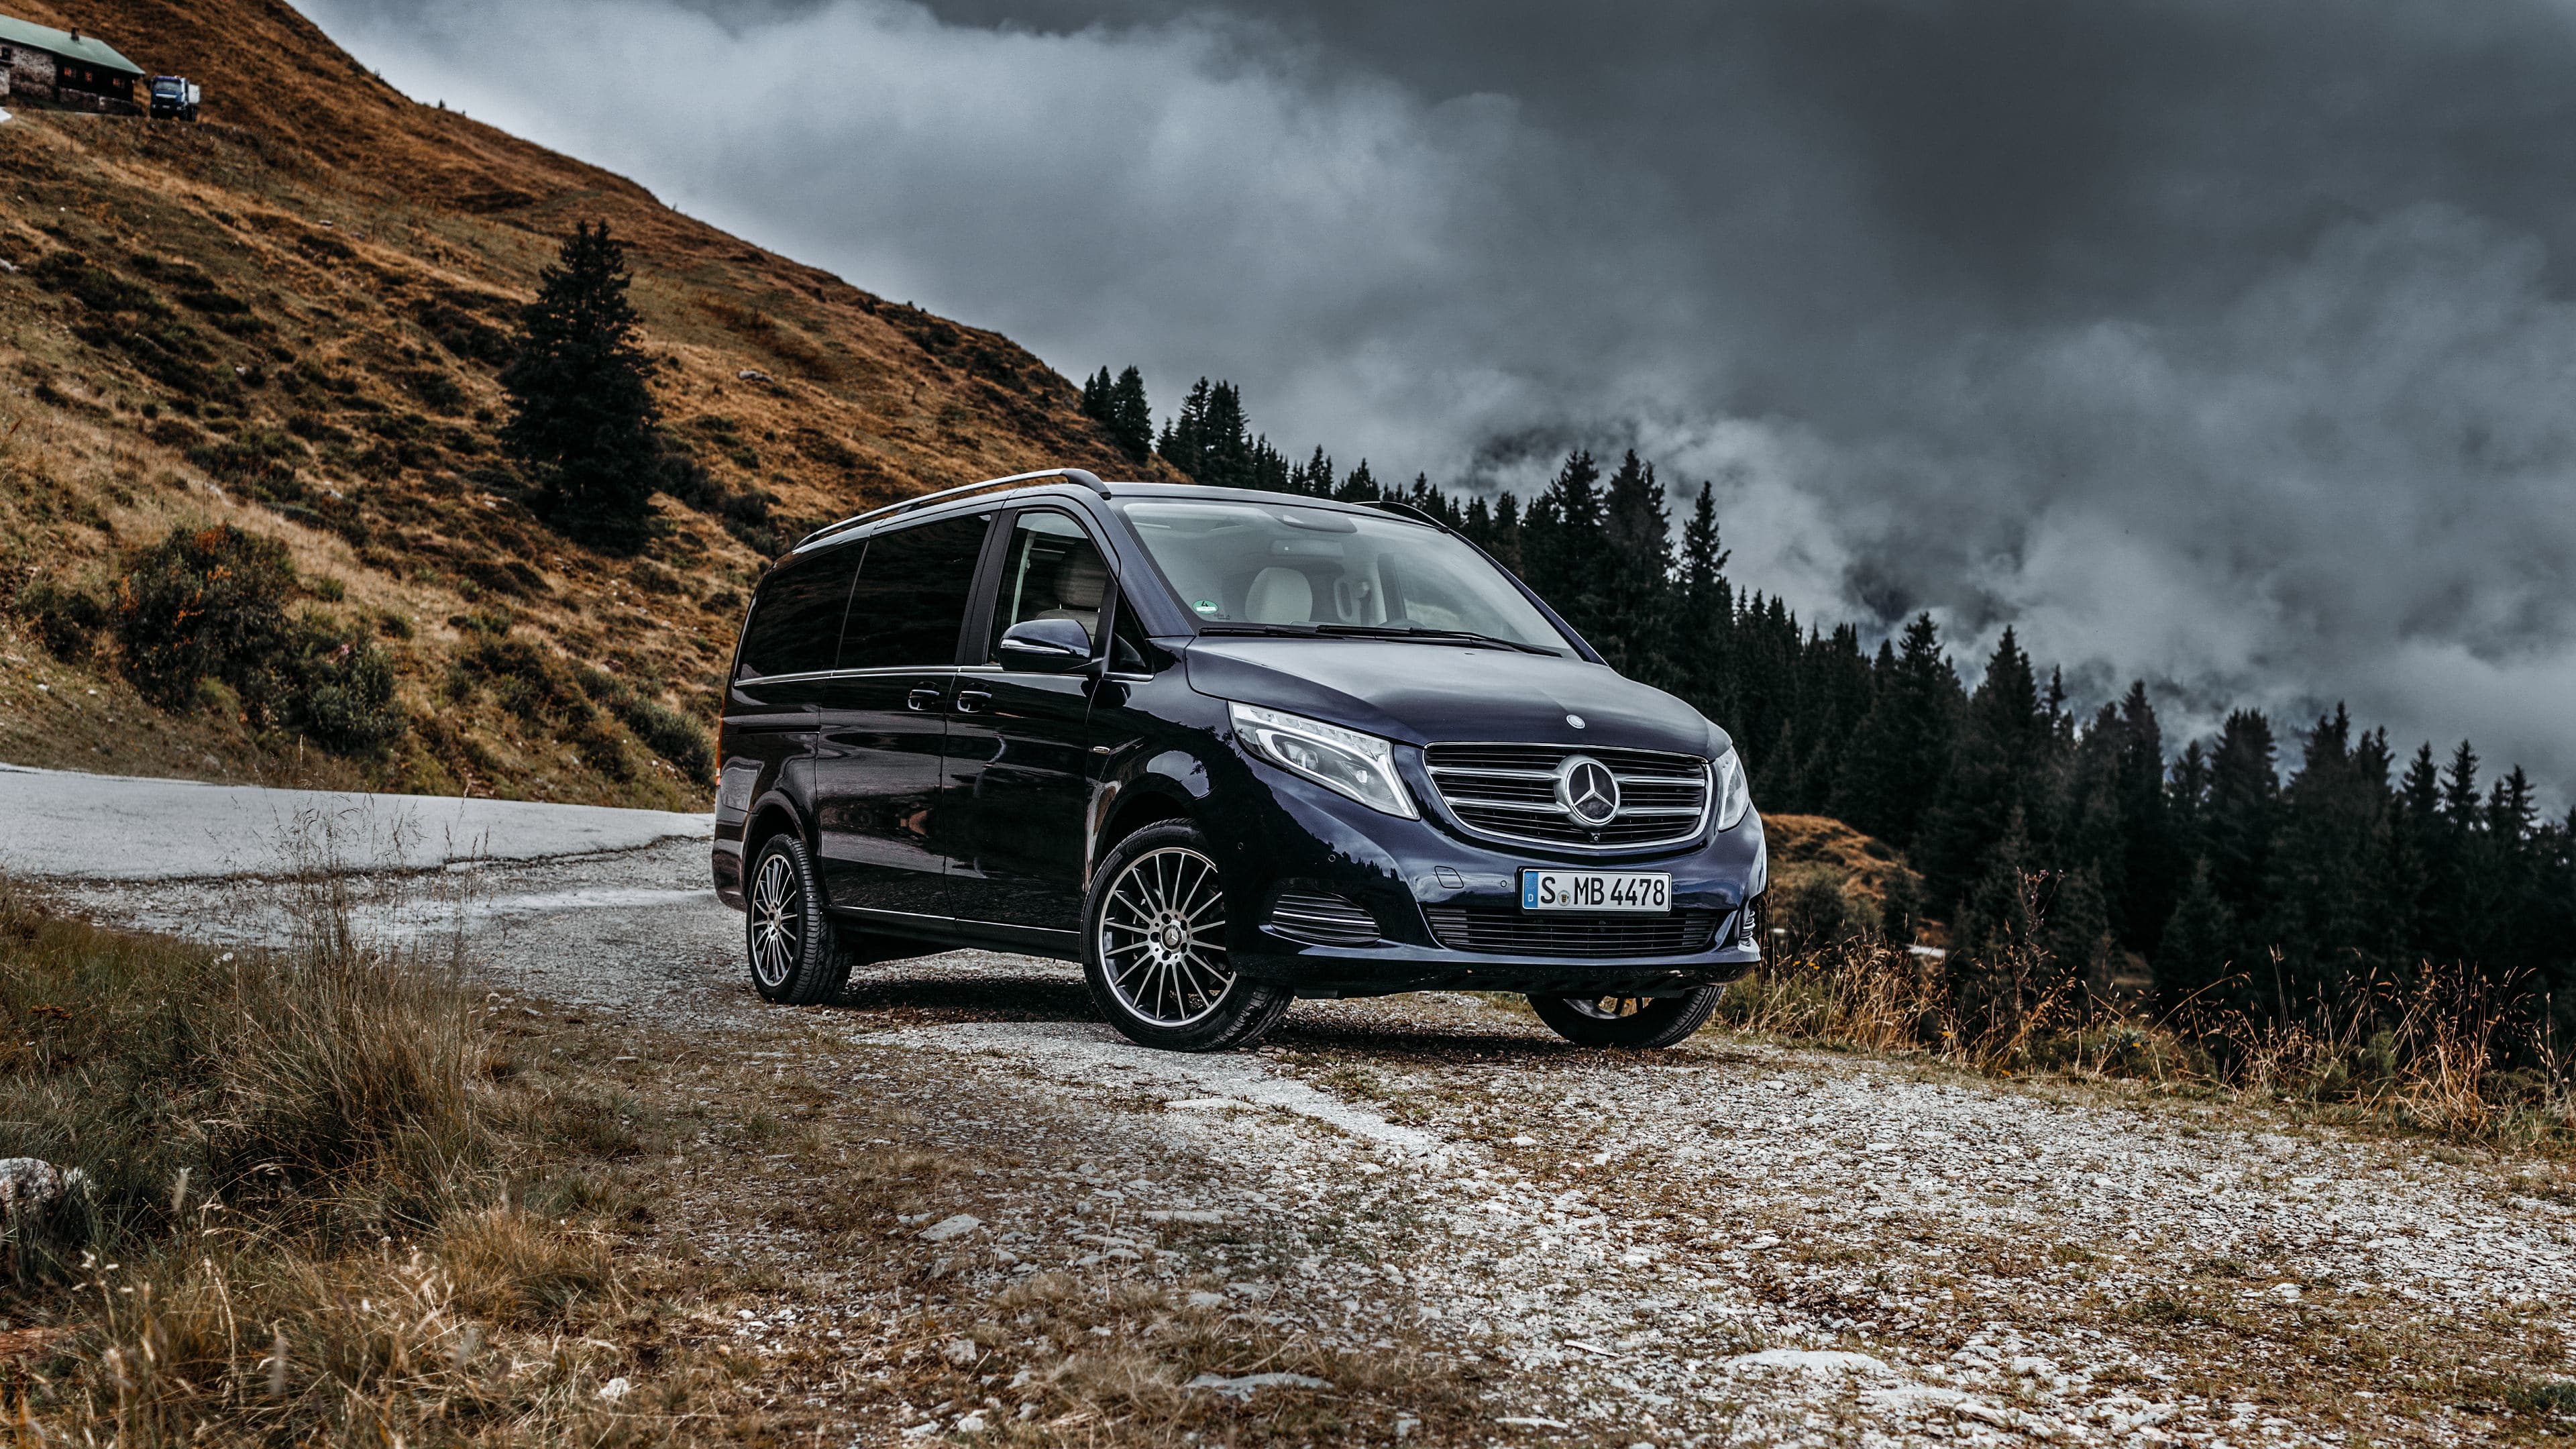 Luxury & multipurpose - here's everyting about the new Mercedes V